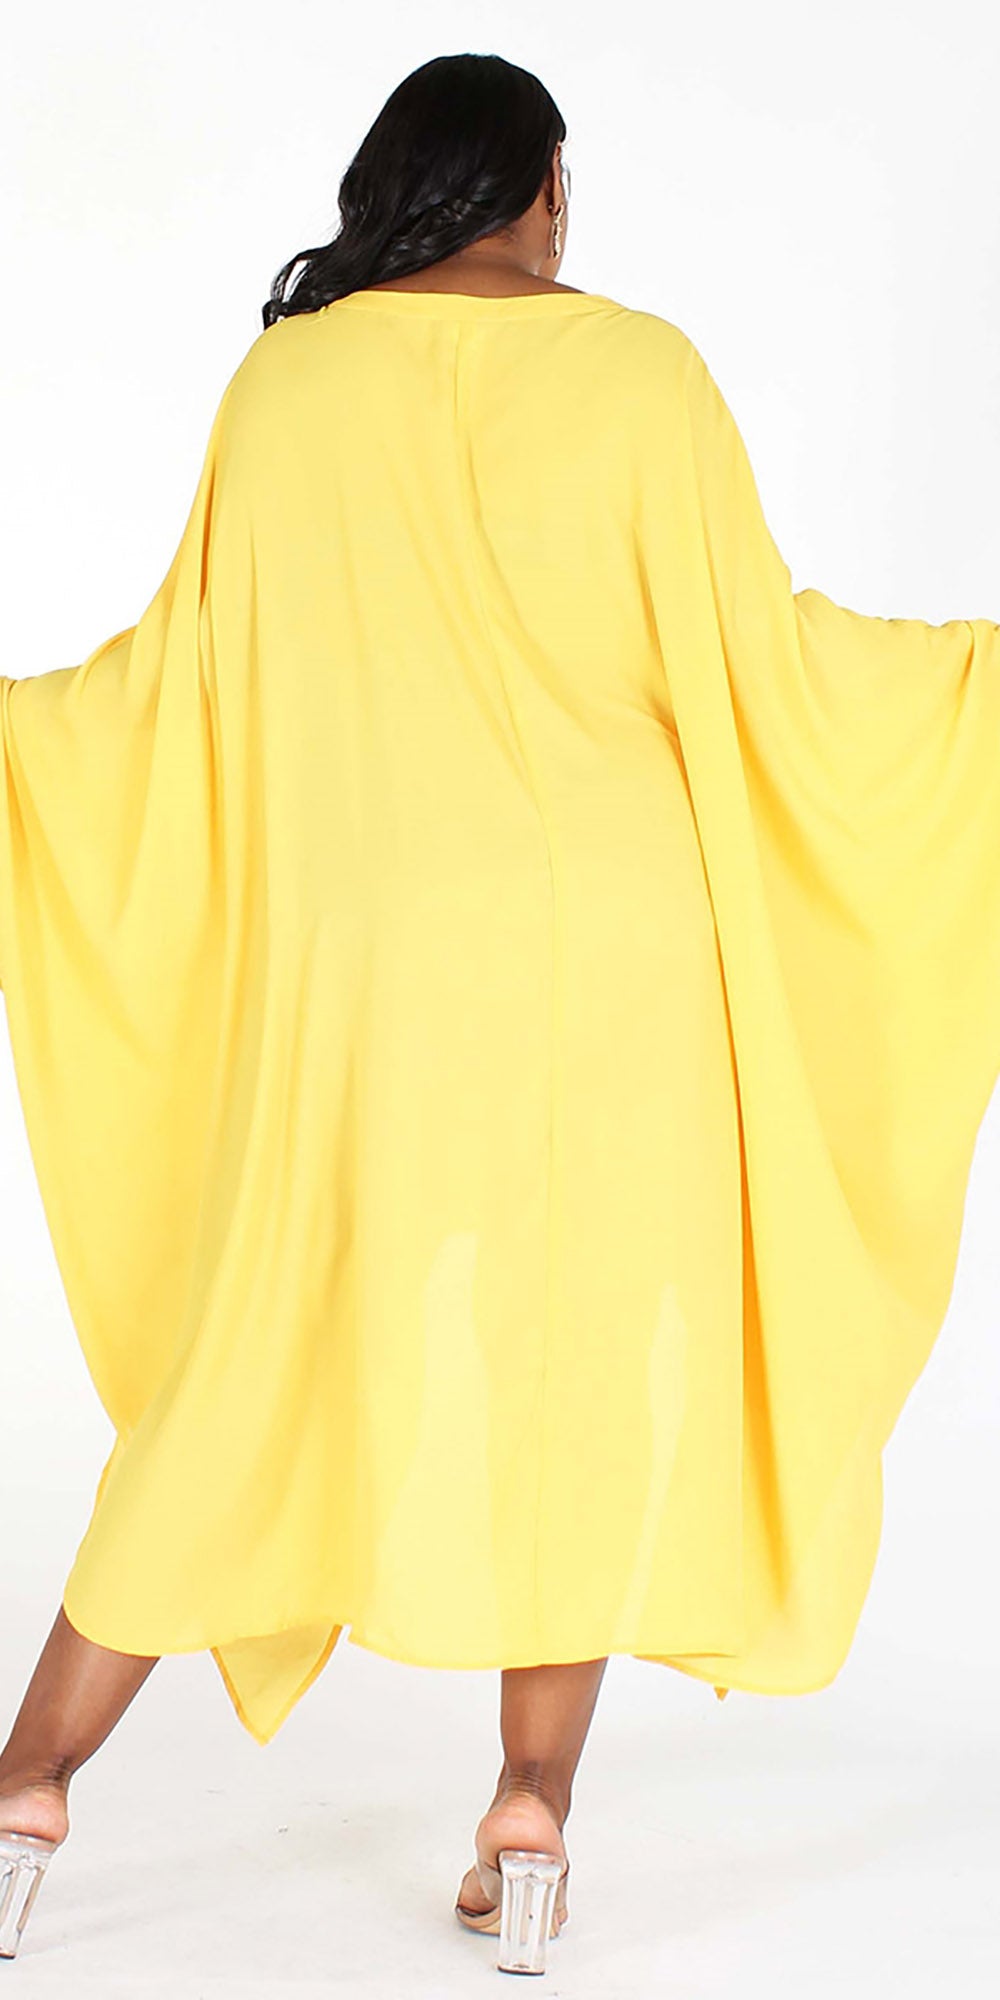 Eien EI1833 - Yellow - Sheer Faux Leather Pocket Top